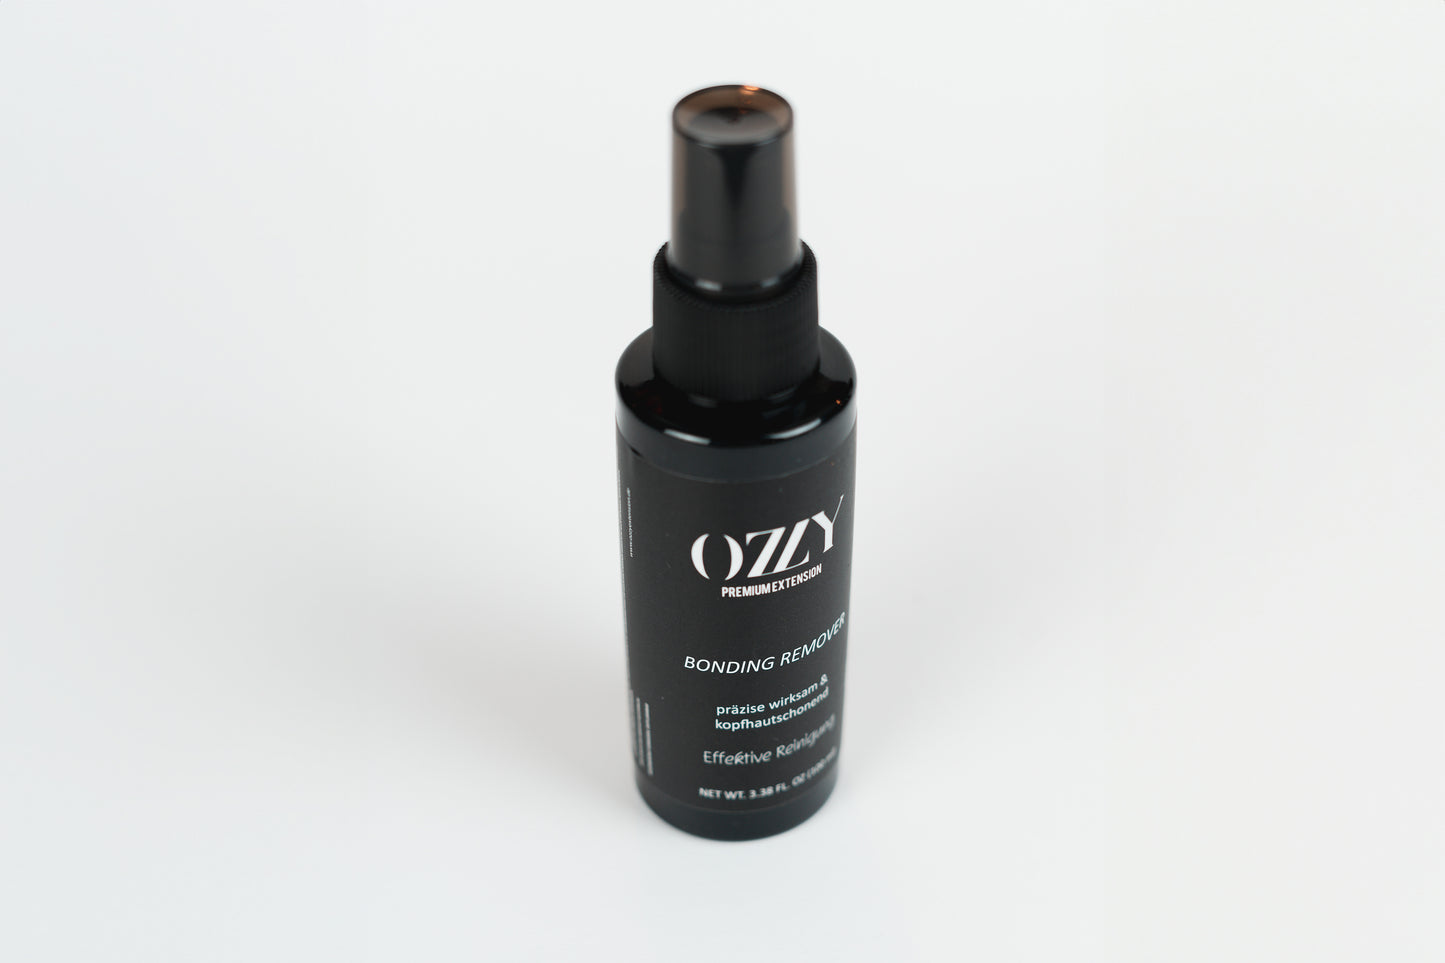 Keratin remover by Ozzy